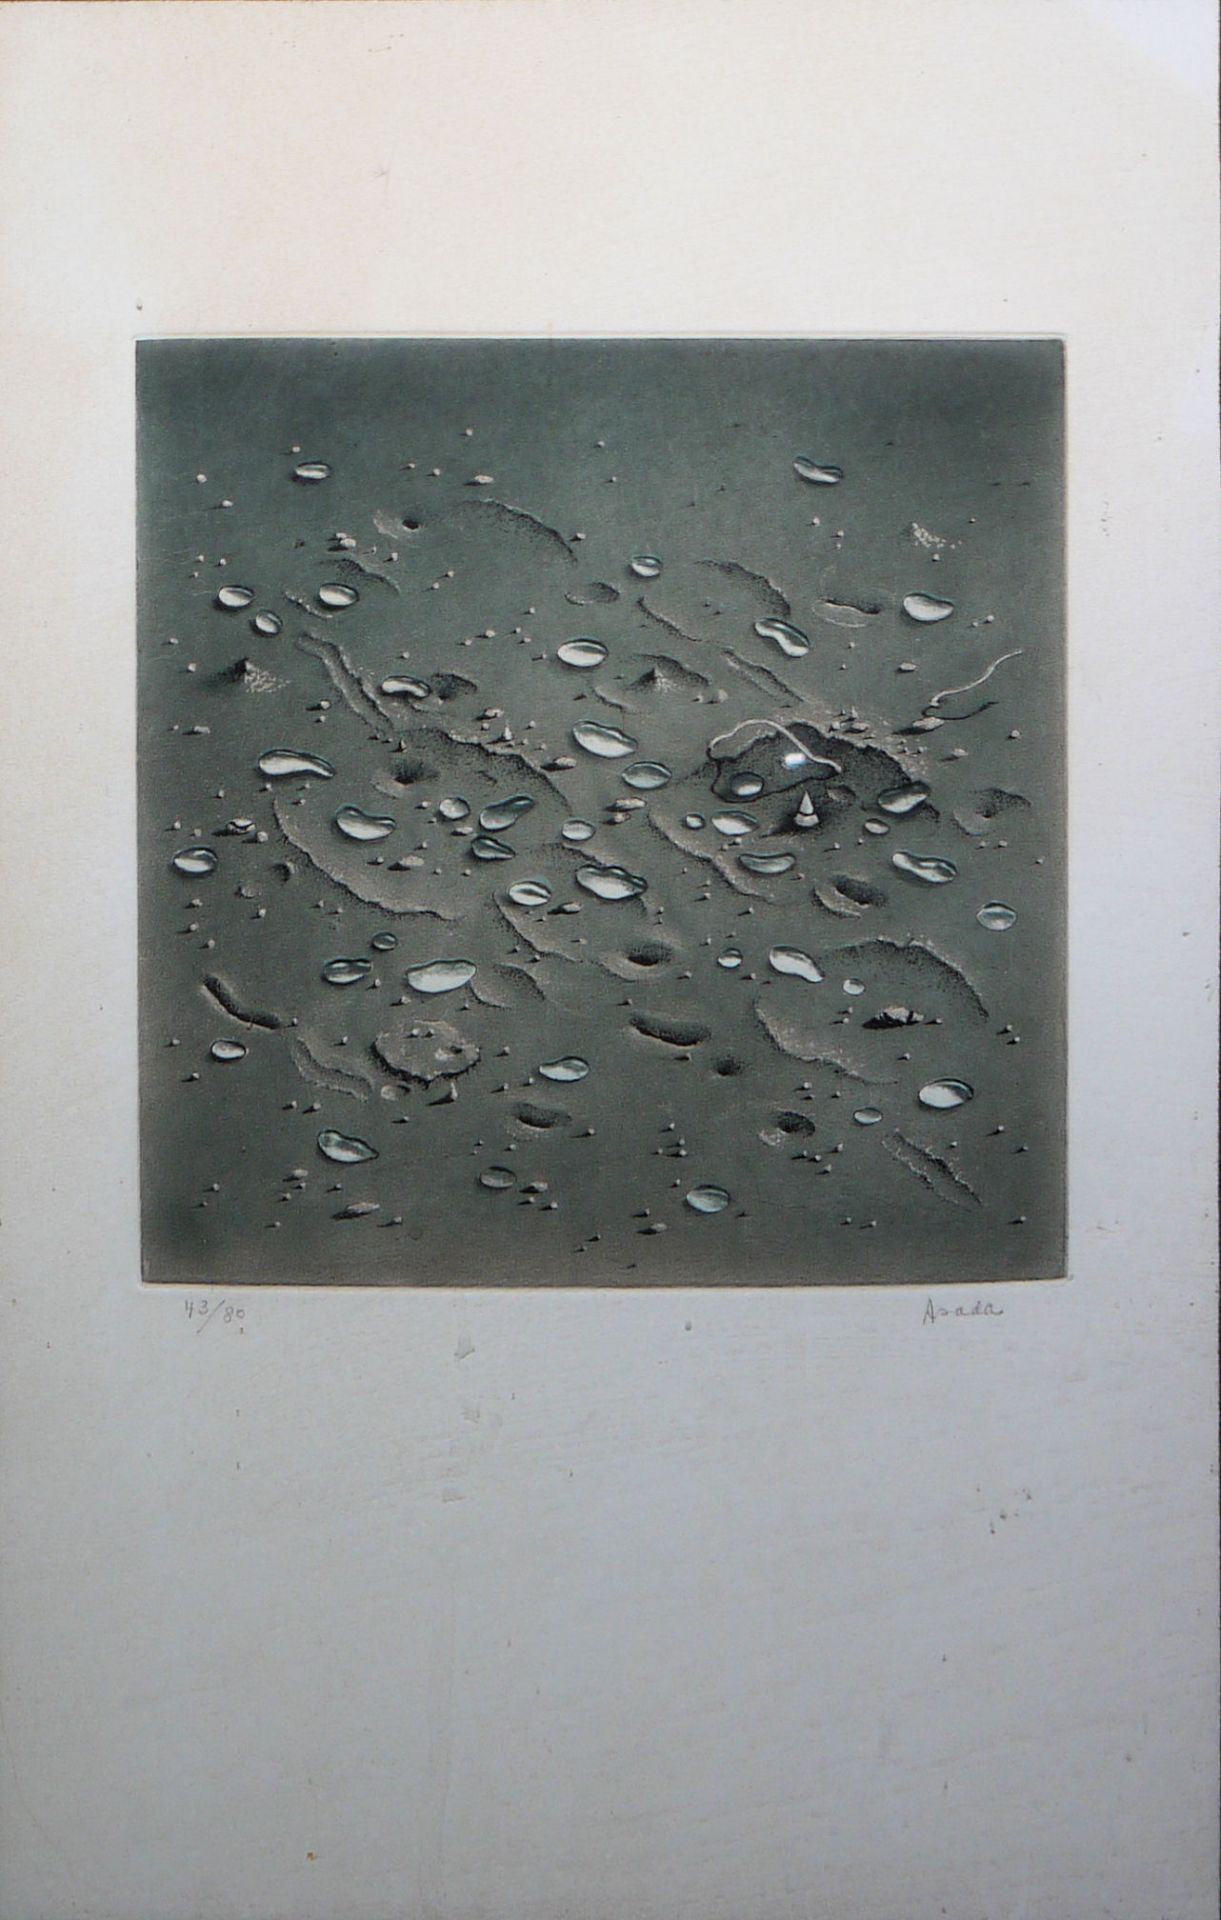 Hiroshi Asada, "Histoire de terre", 5 sign. Colour aquatint etchings from 1978, 3 x in cassette, 2  - Image 2 of 6